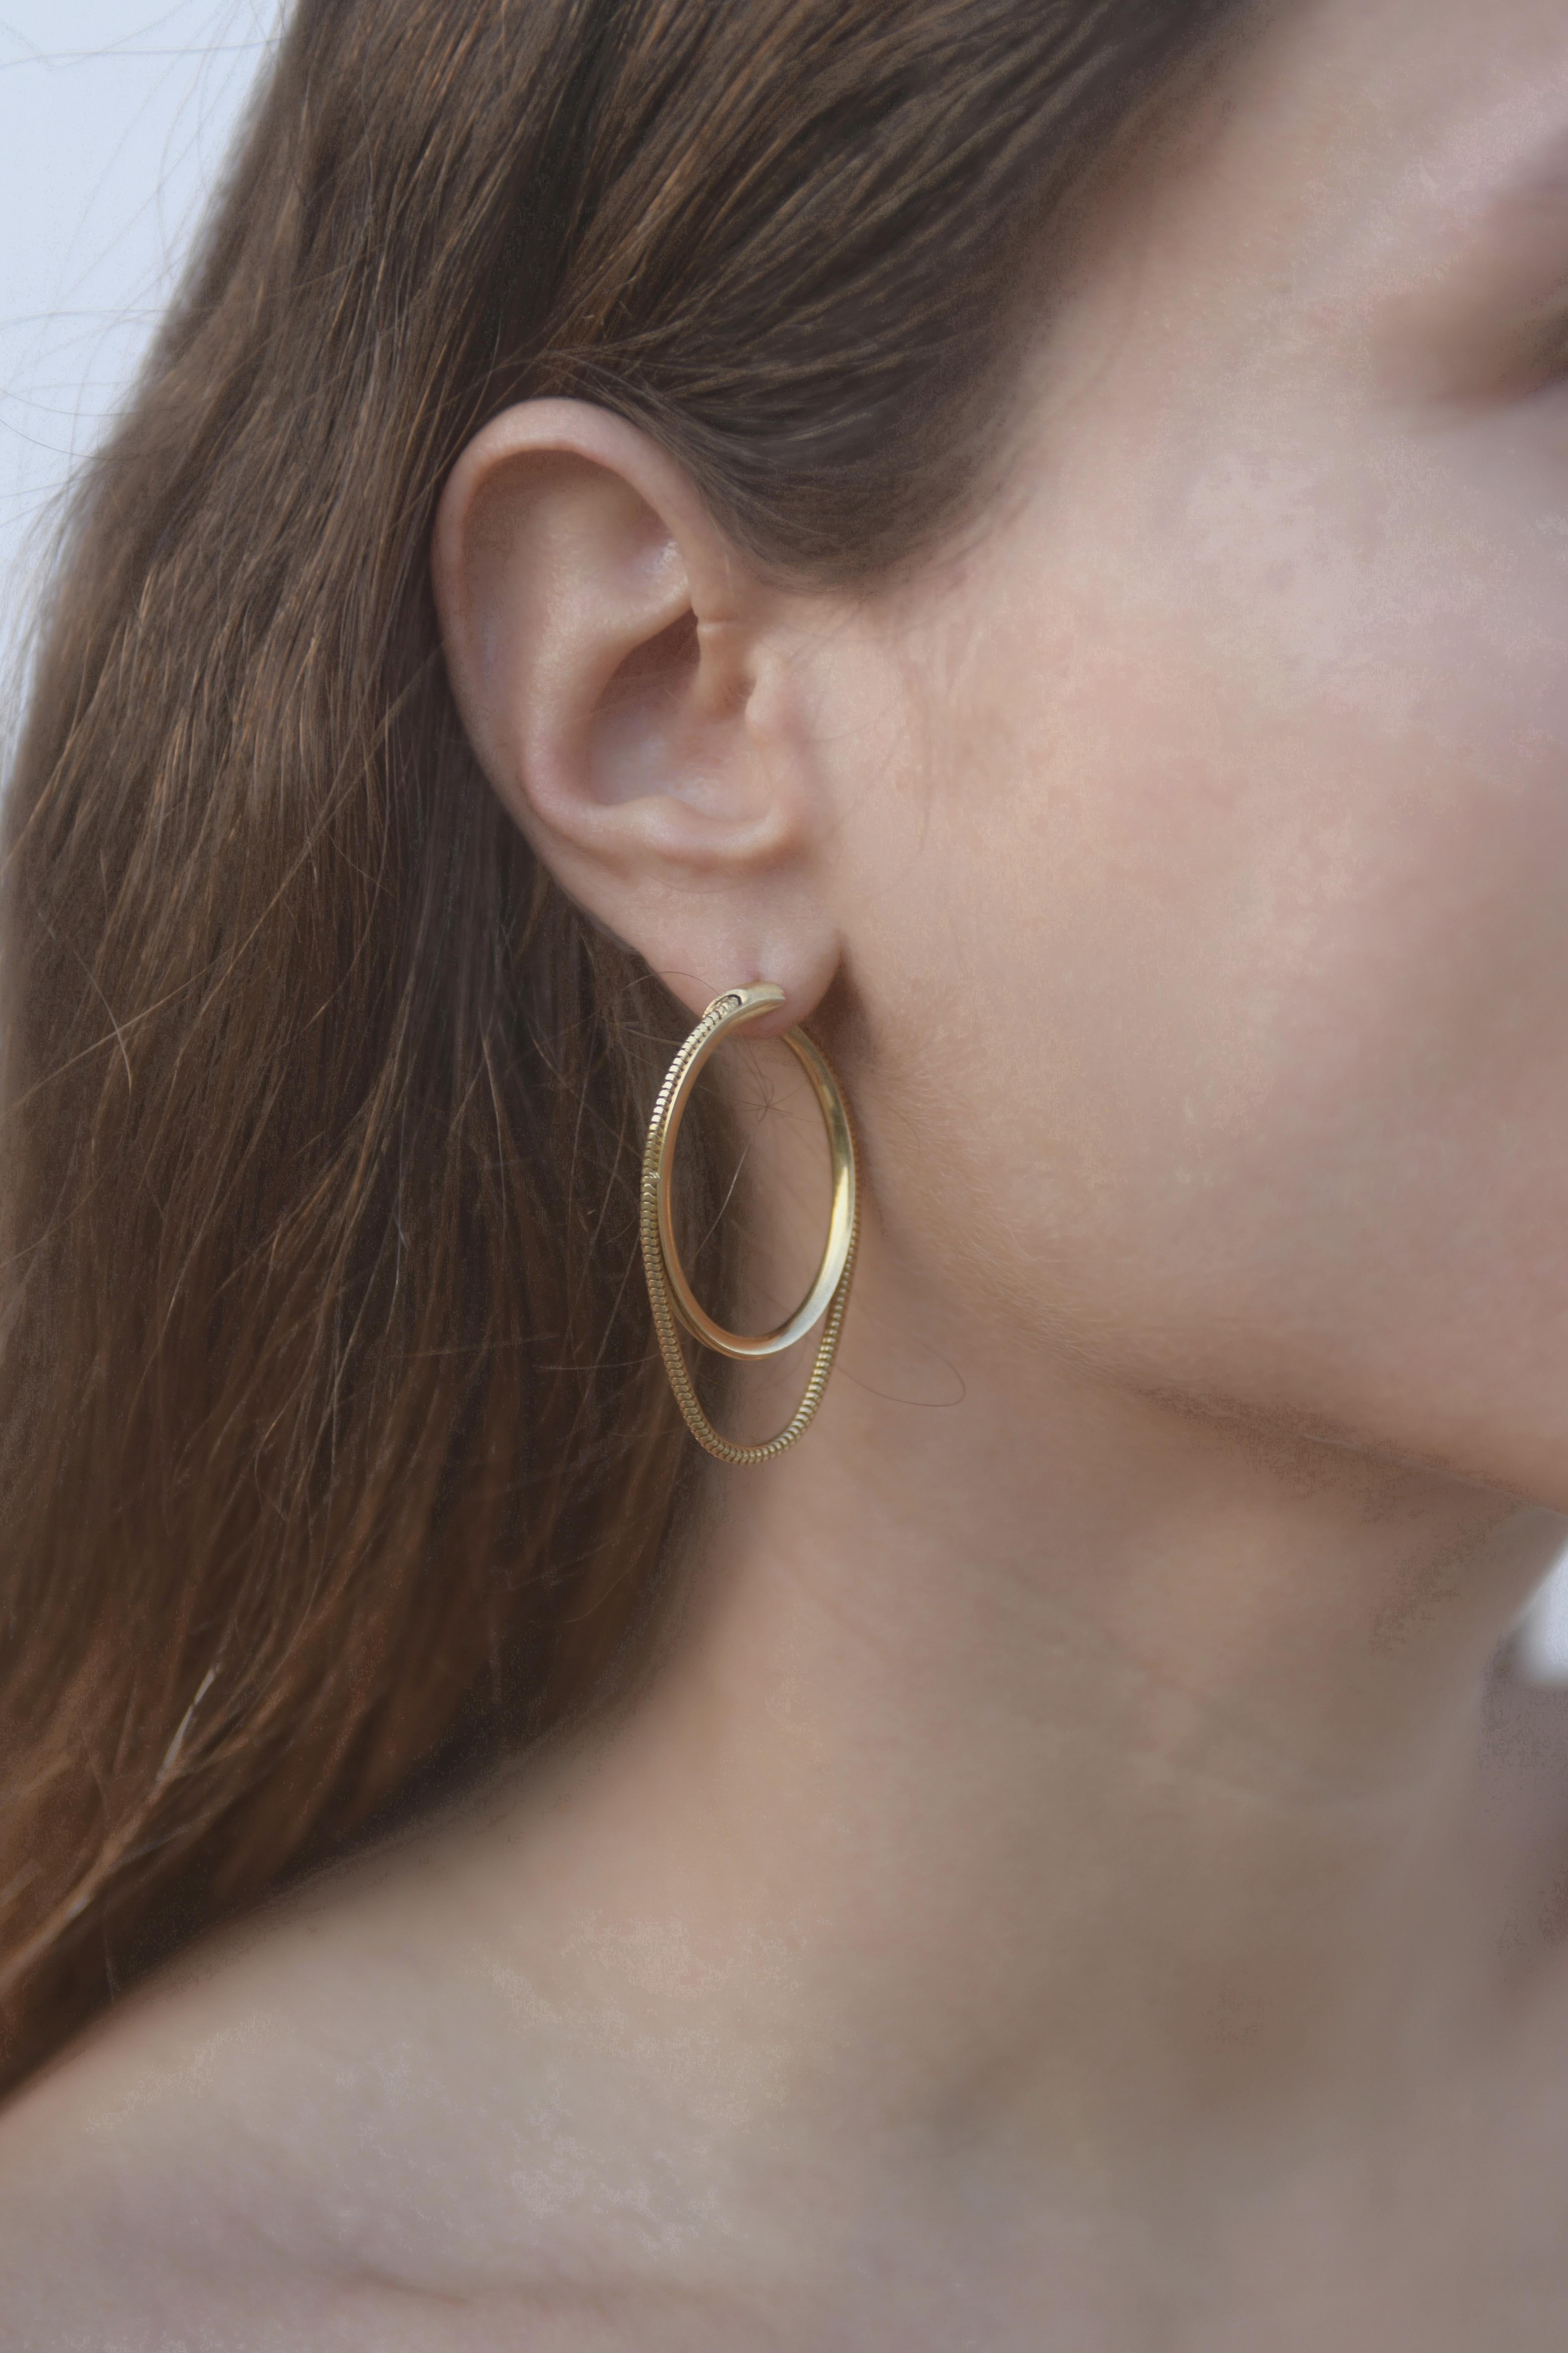 Contemporary Hoops Medium Minimal Round with Snake Chain 18kGold-Plated Silver Greek Earrings For Sale